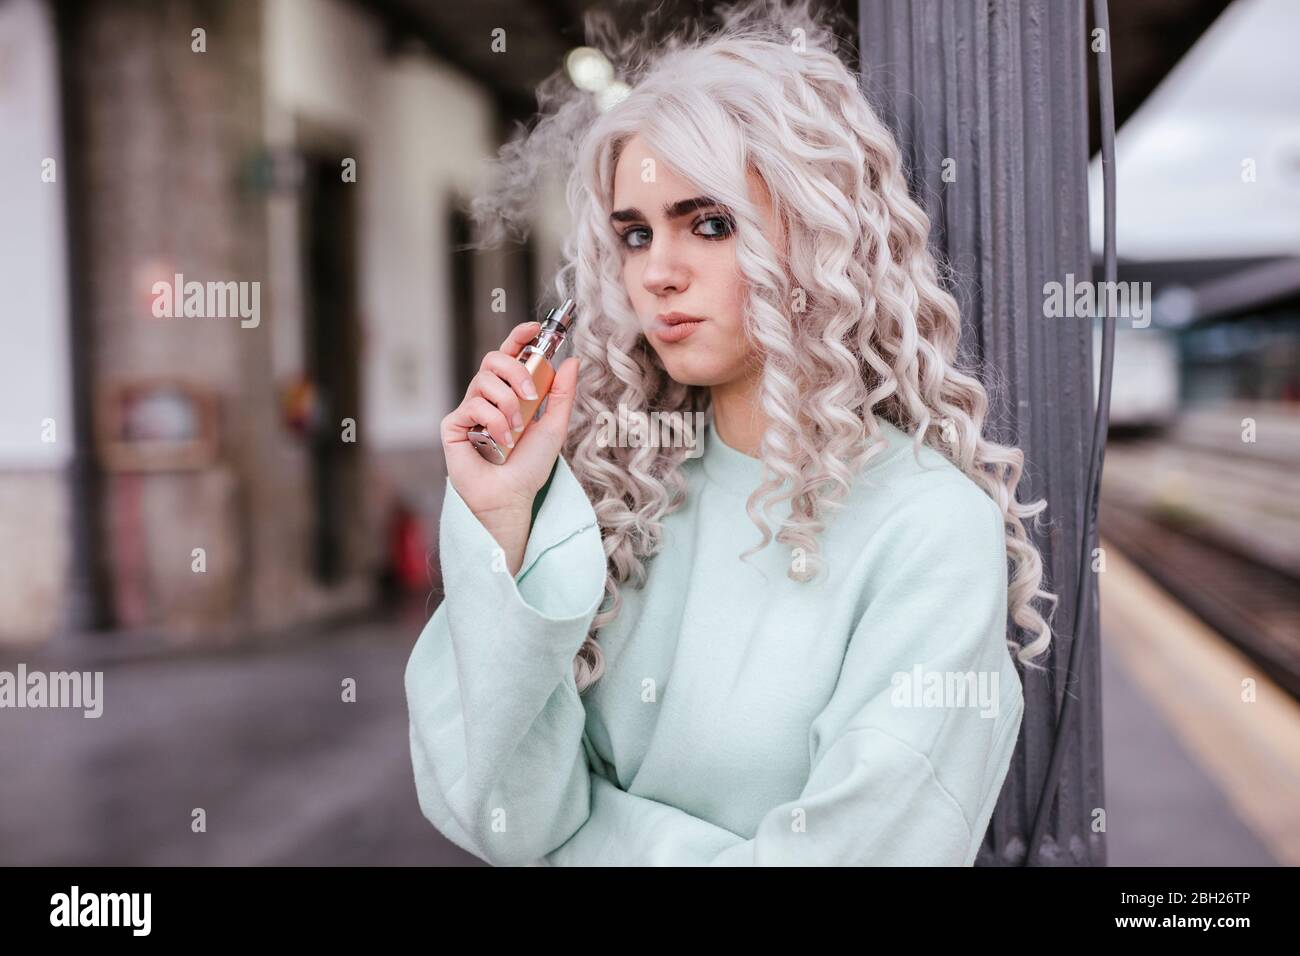 Portrait of young woman smoking electronic cigarette on platform Stock Photo